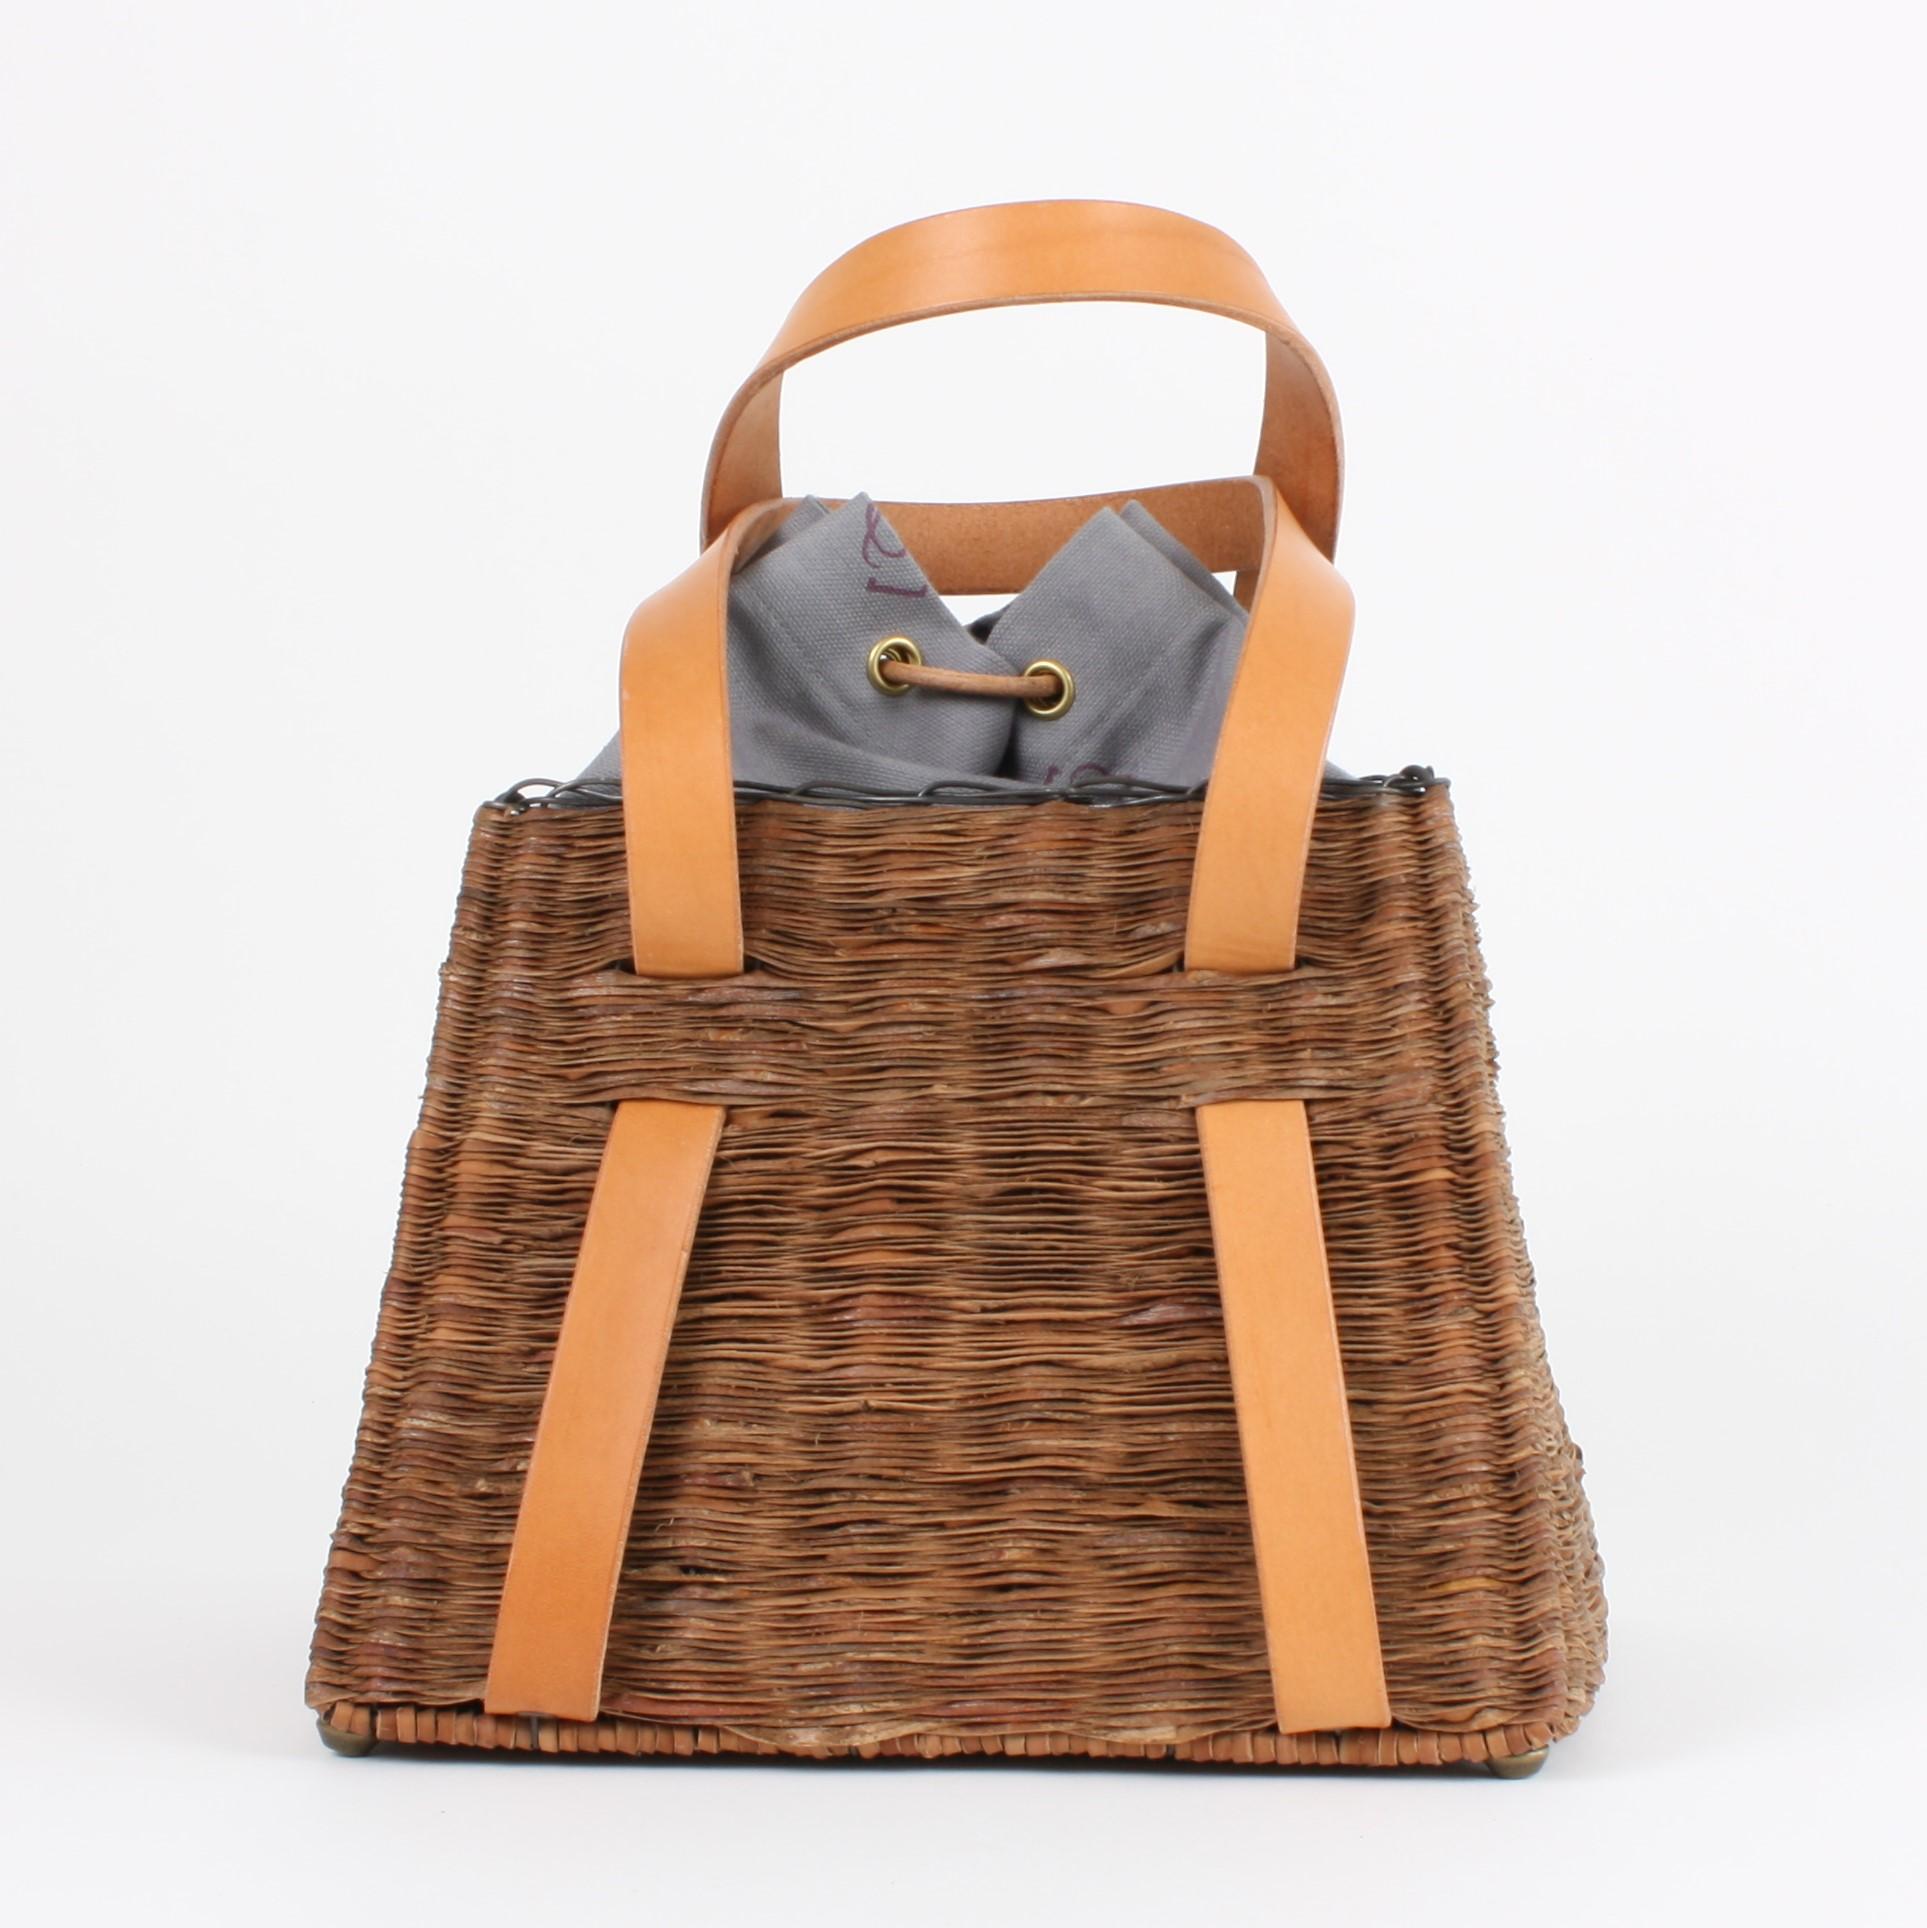 Brown Bespoke Leather and Willow Bark Handbag - L’Olympien For Sale